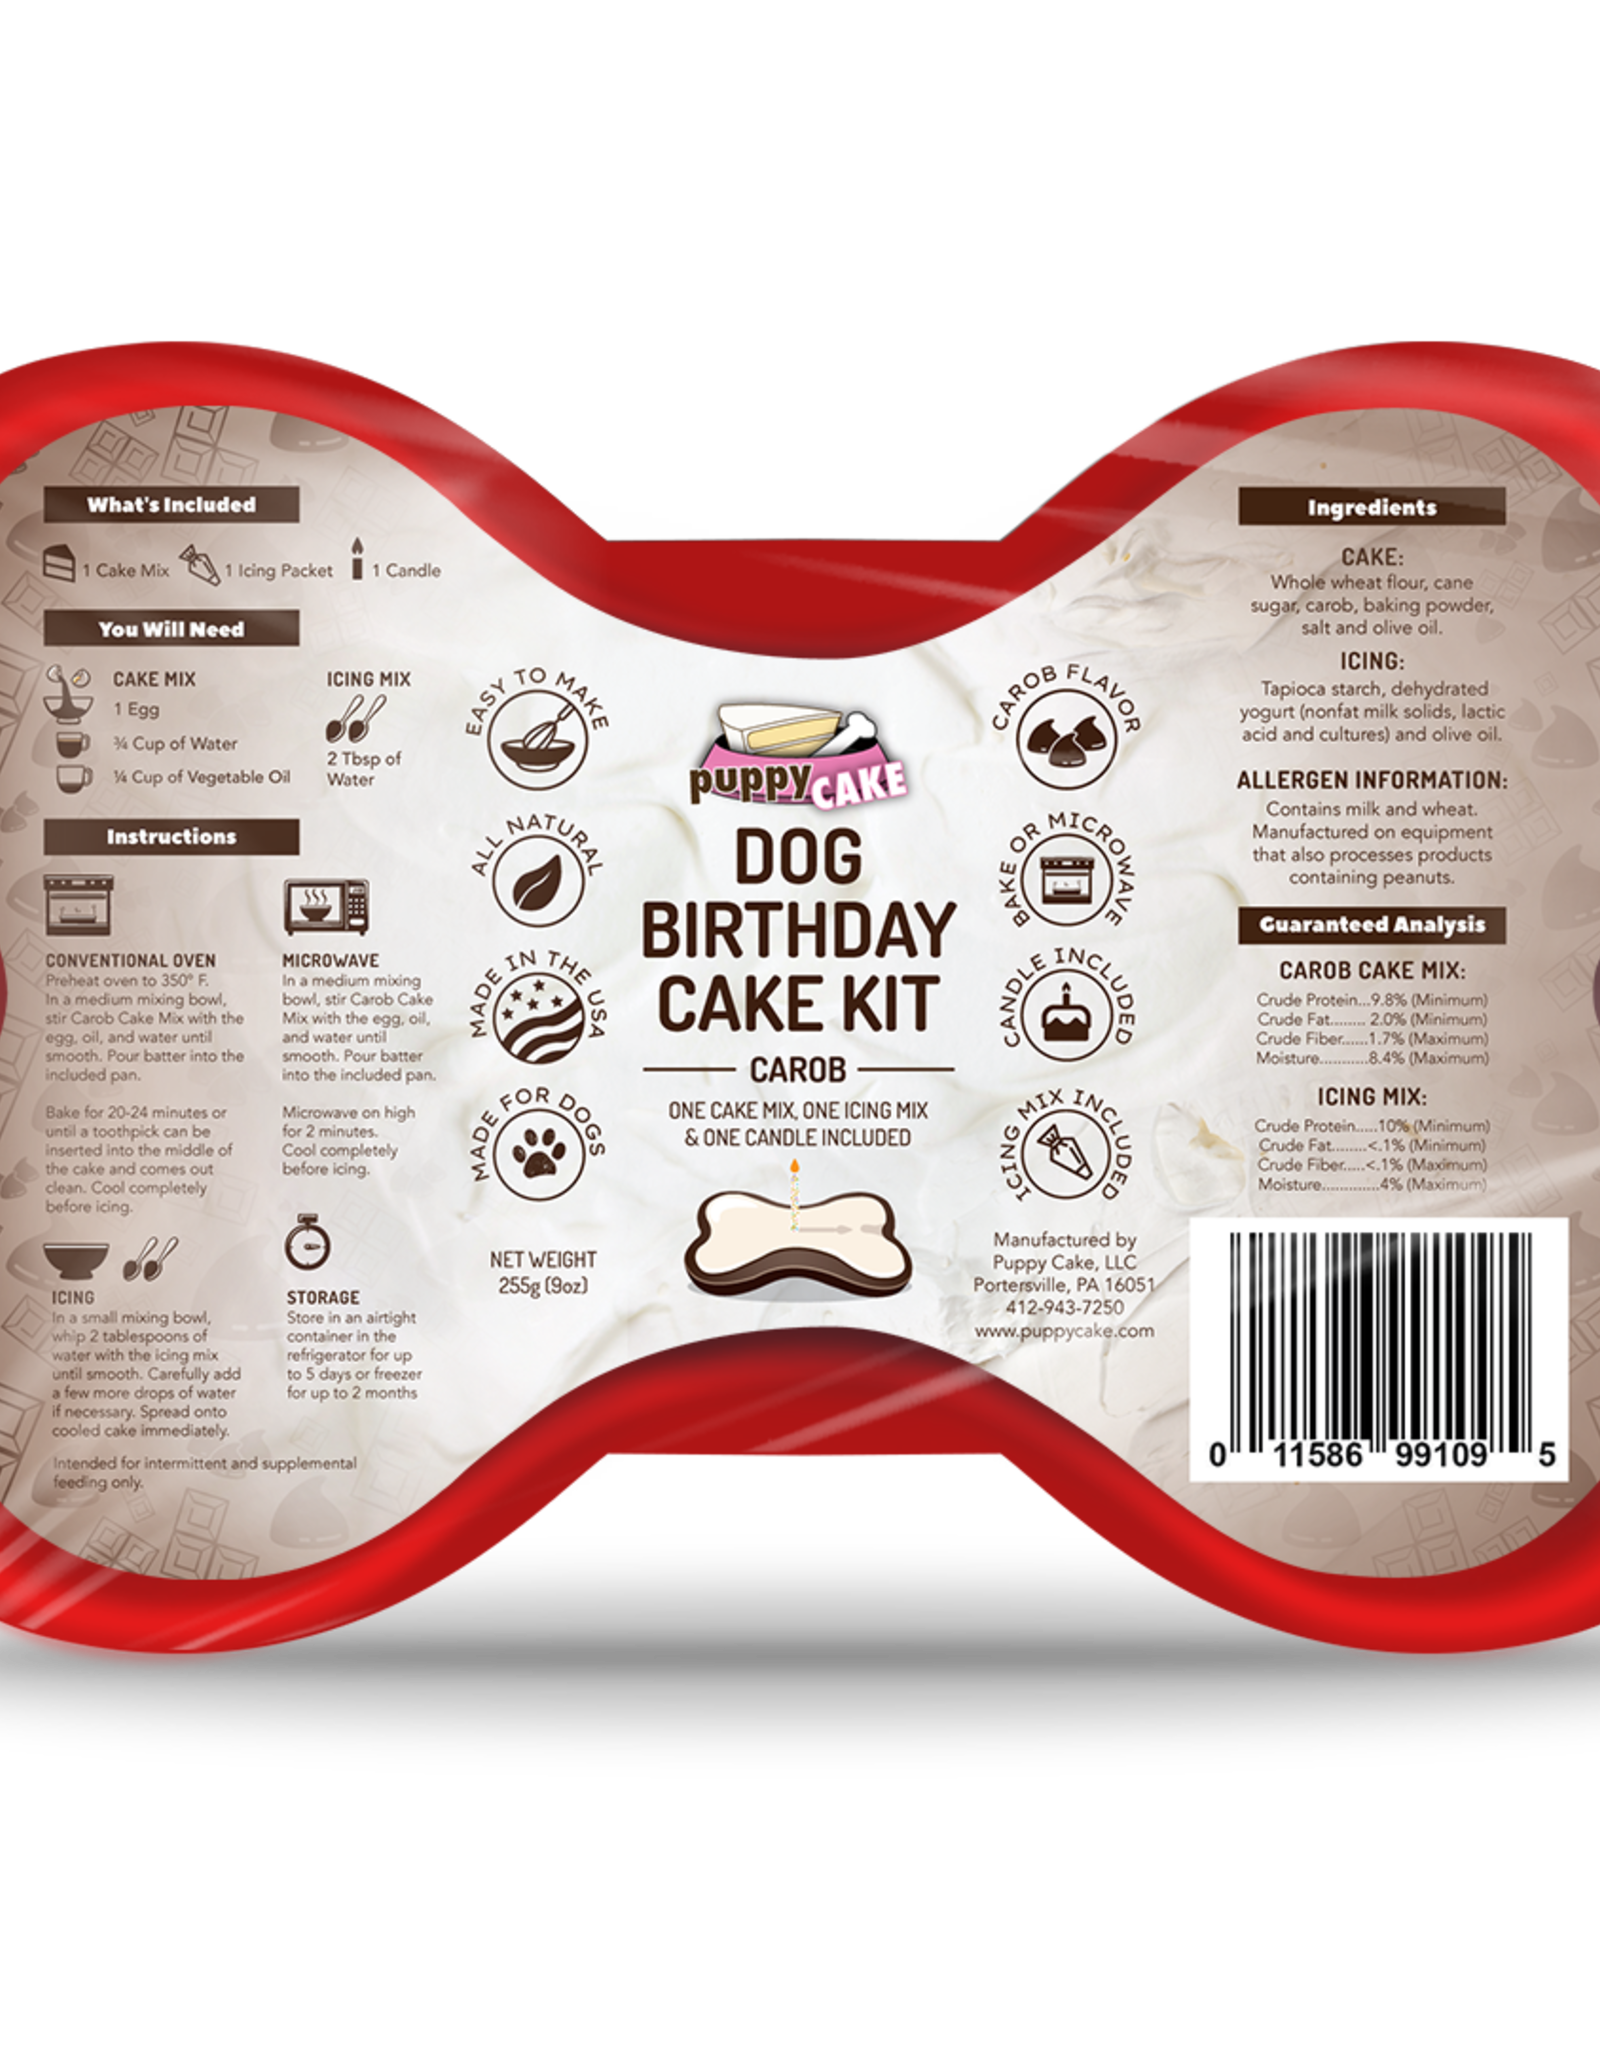 Puppy Cake Cake Mix Birthday Cake with Frosting & Candle, Carob